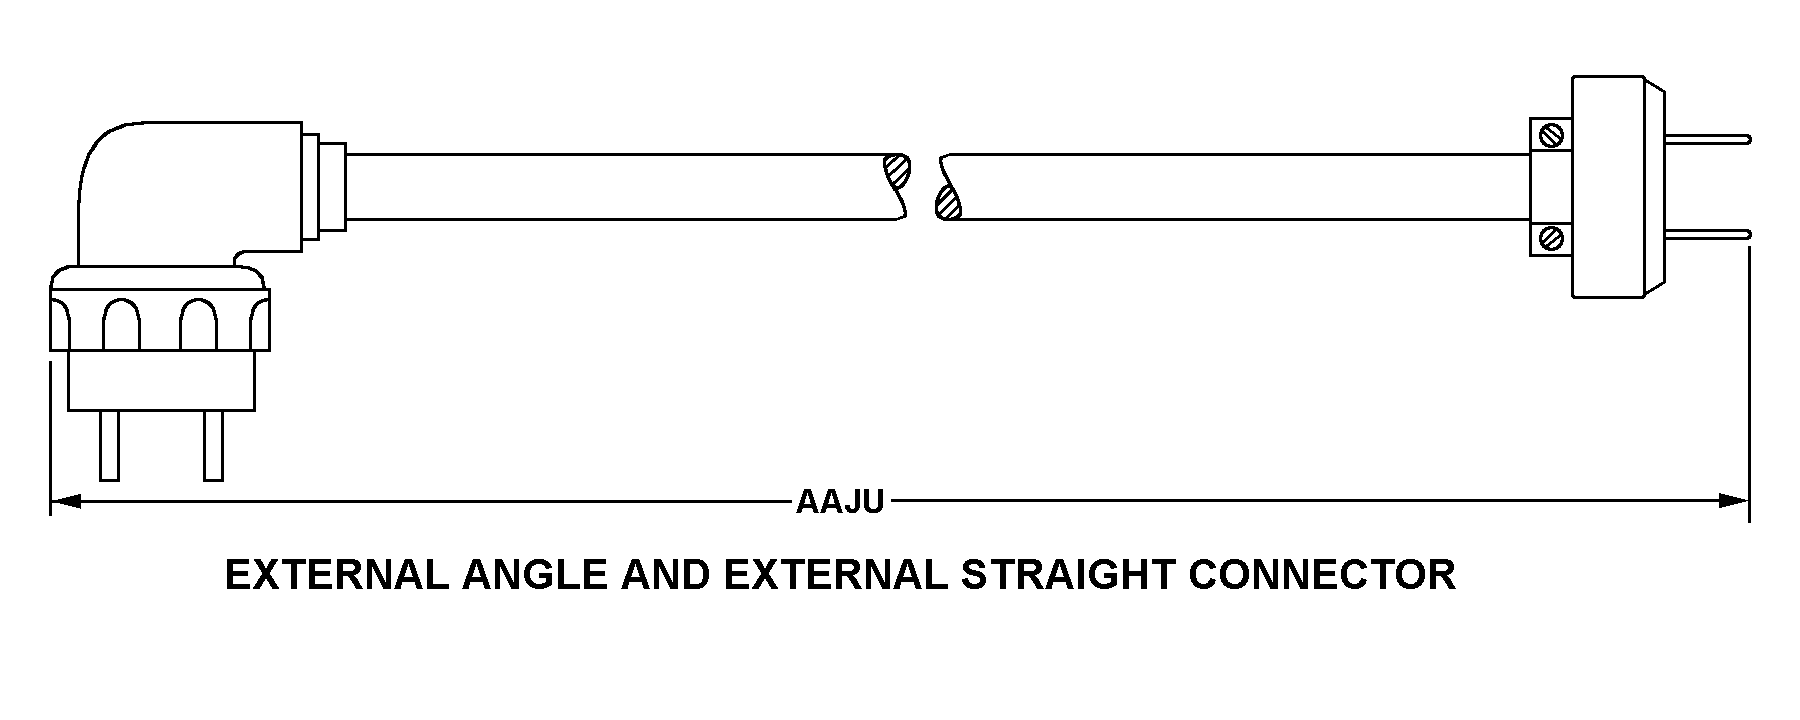 EXTERNAL ANGLE AND EXTERNAL STRAIGHT CONNECTOR style nsn 5995-01-378-6171